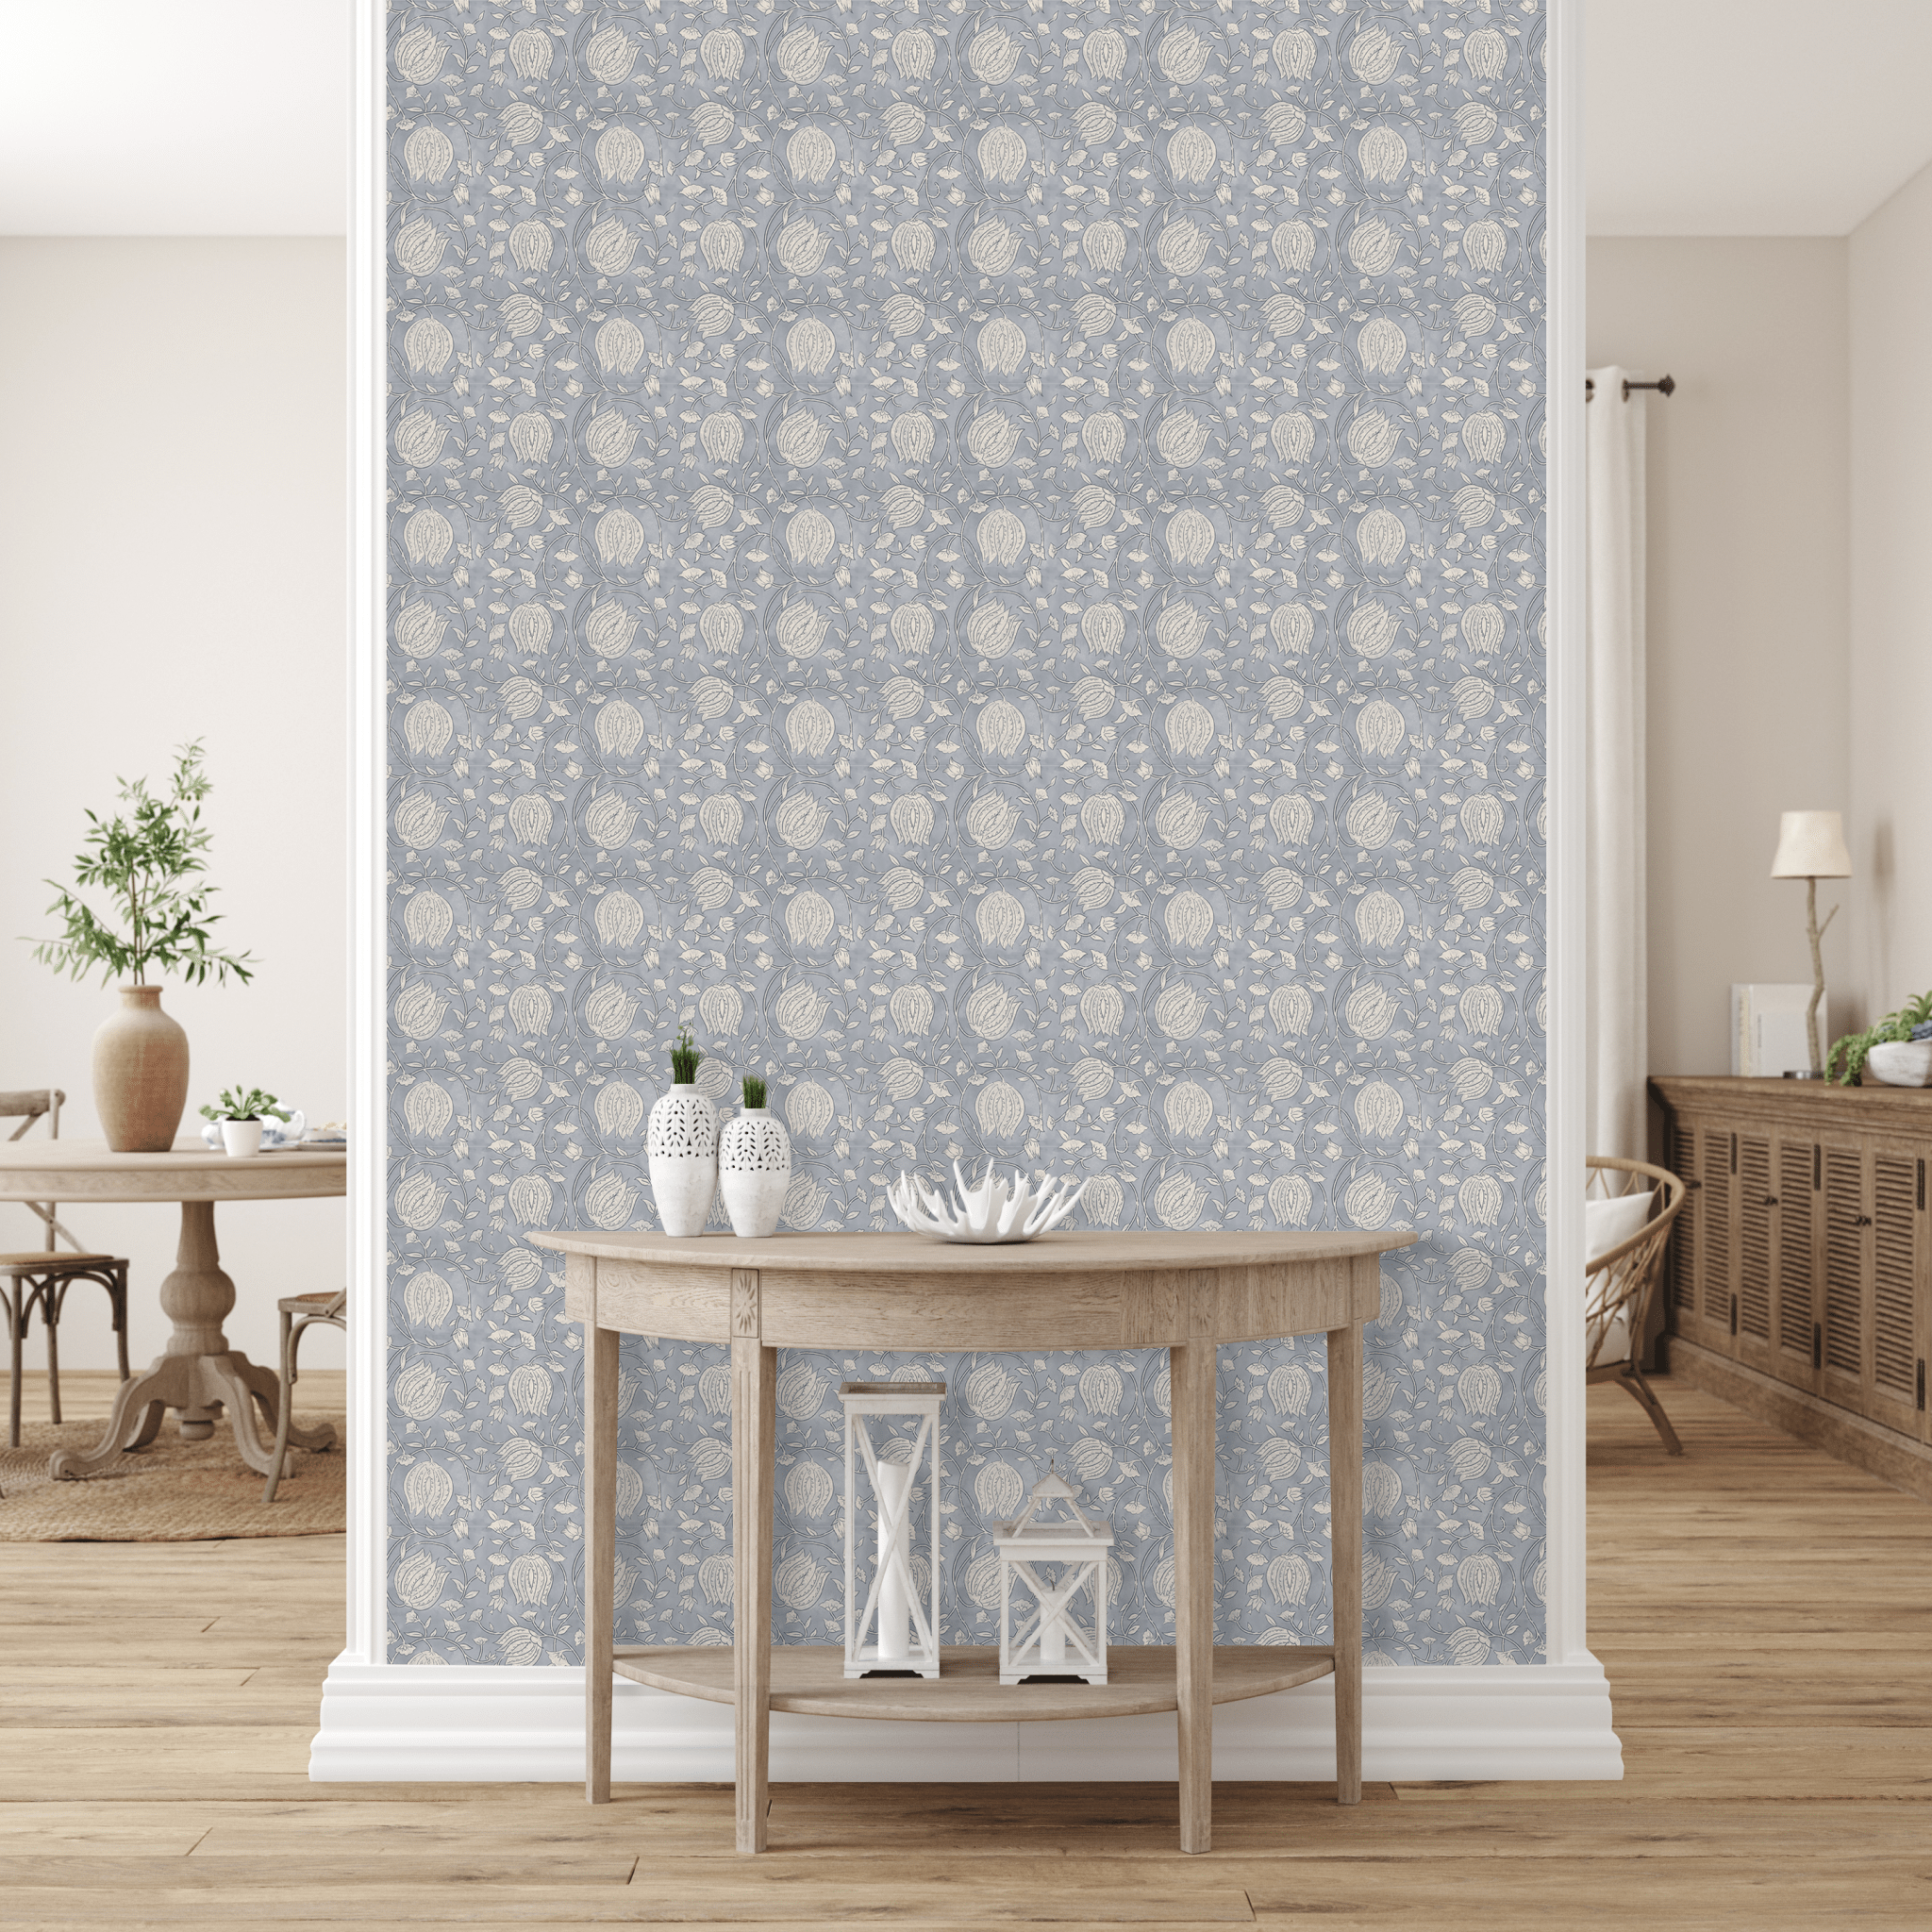  chic room with a wall featuring blue lotus pattern peel and stick removable wallpaper. A wooden console table with decorative lanterns and a coral ornament enhances the space. In the background, a plant and a sideboard blend seamlessly